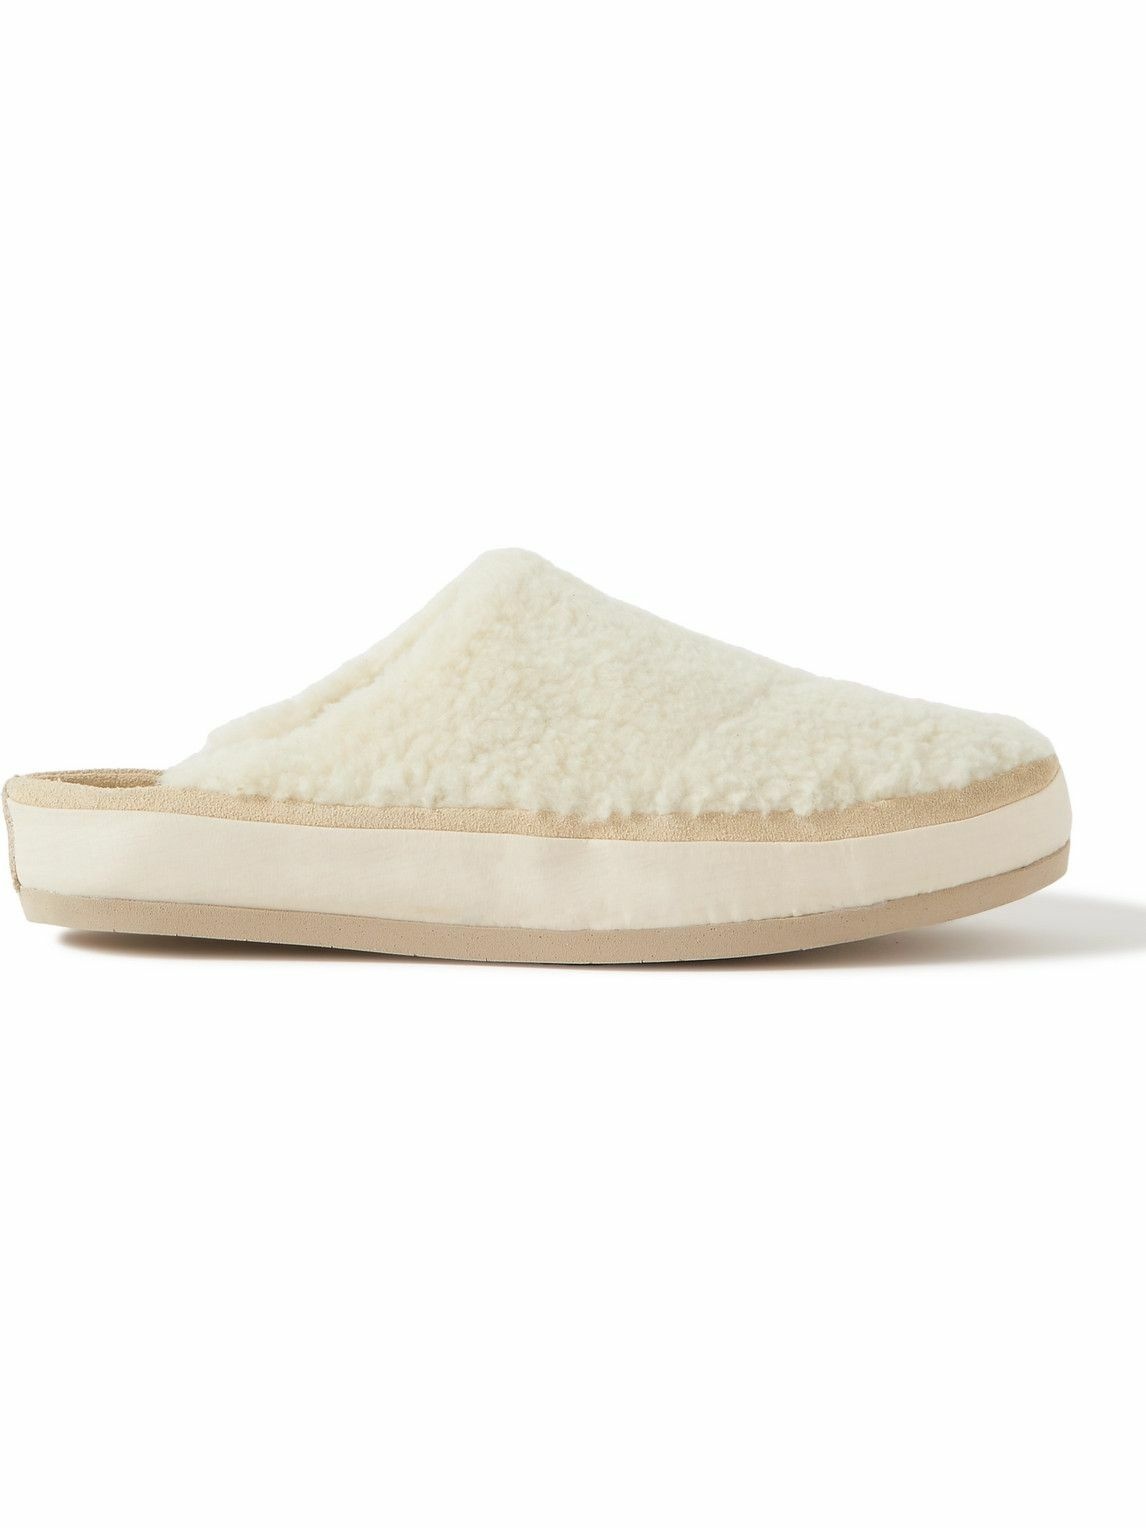 Photo: Mulo - Shearling Slippers - Neutrals